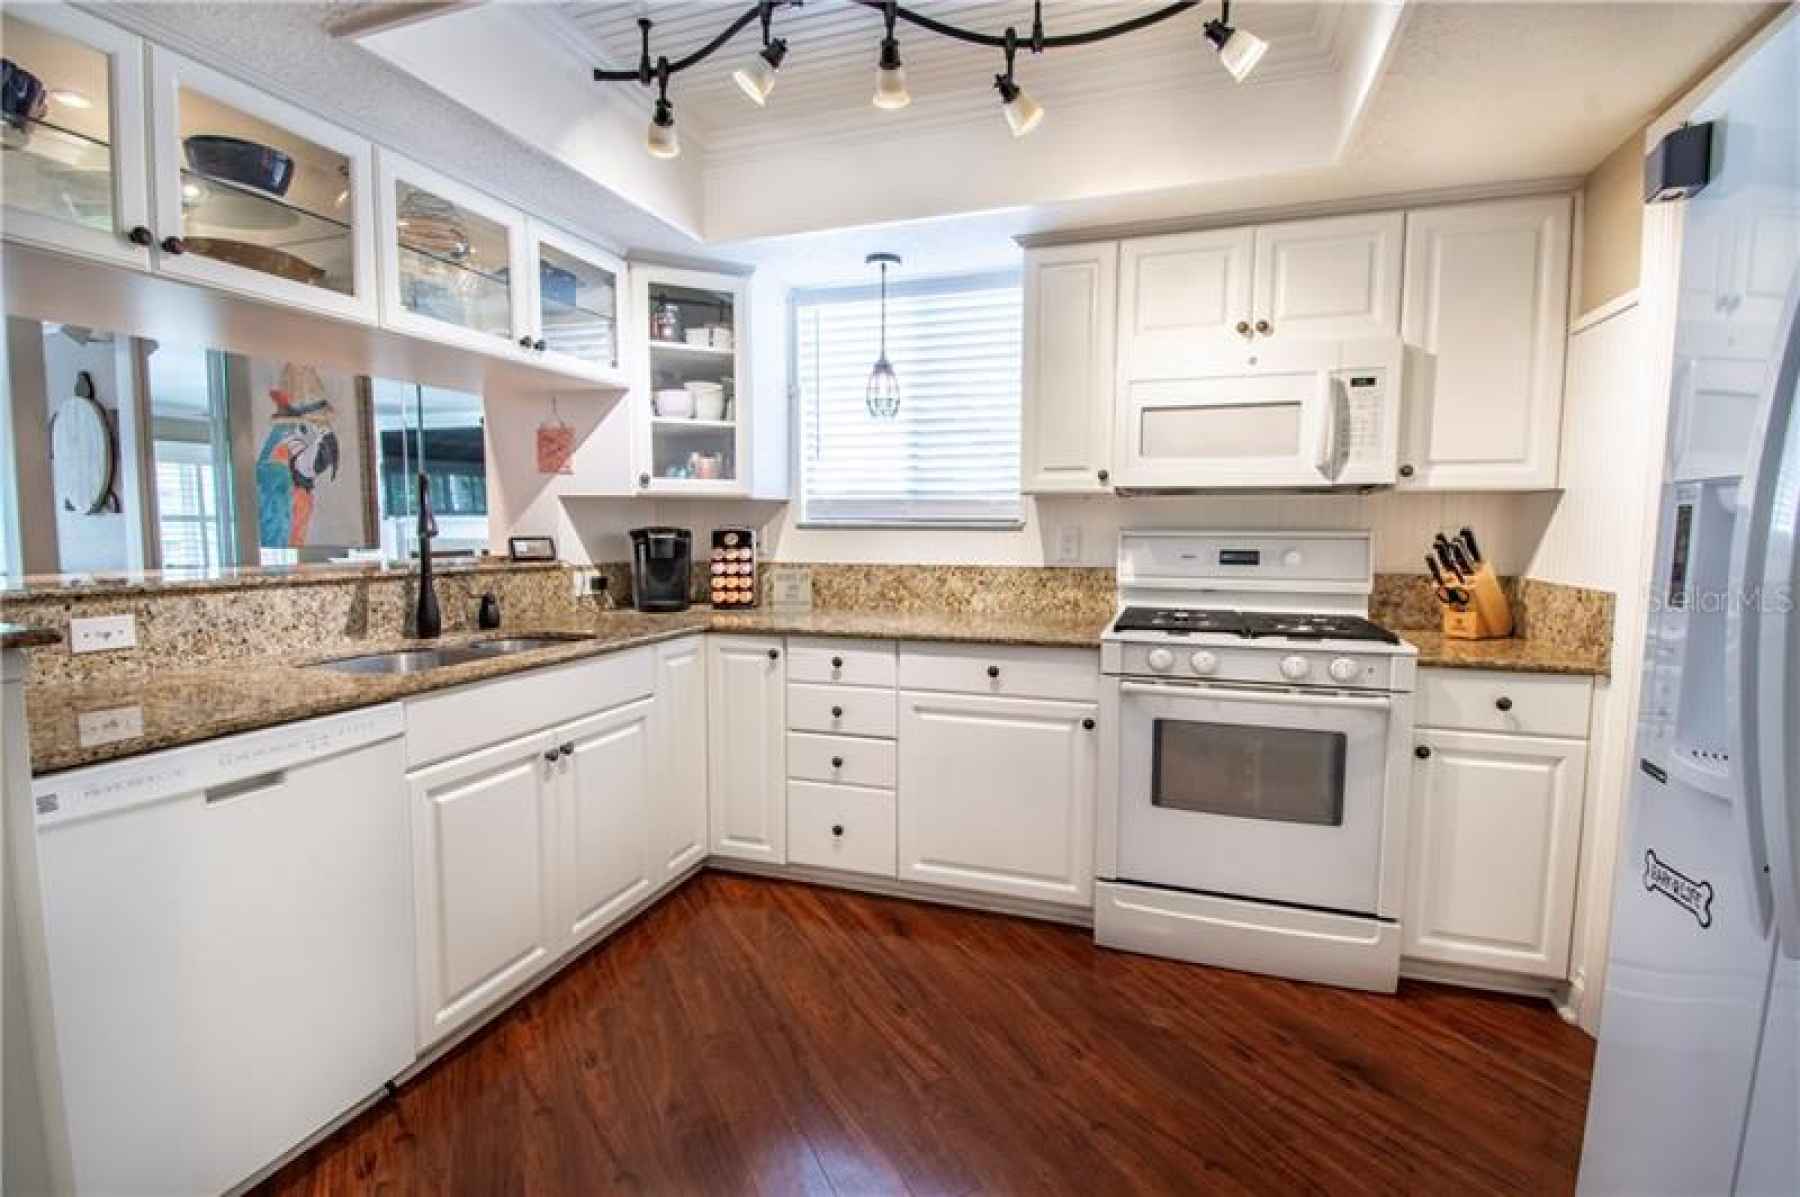 Kitchen with top end appliances and granite countertops